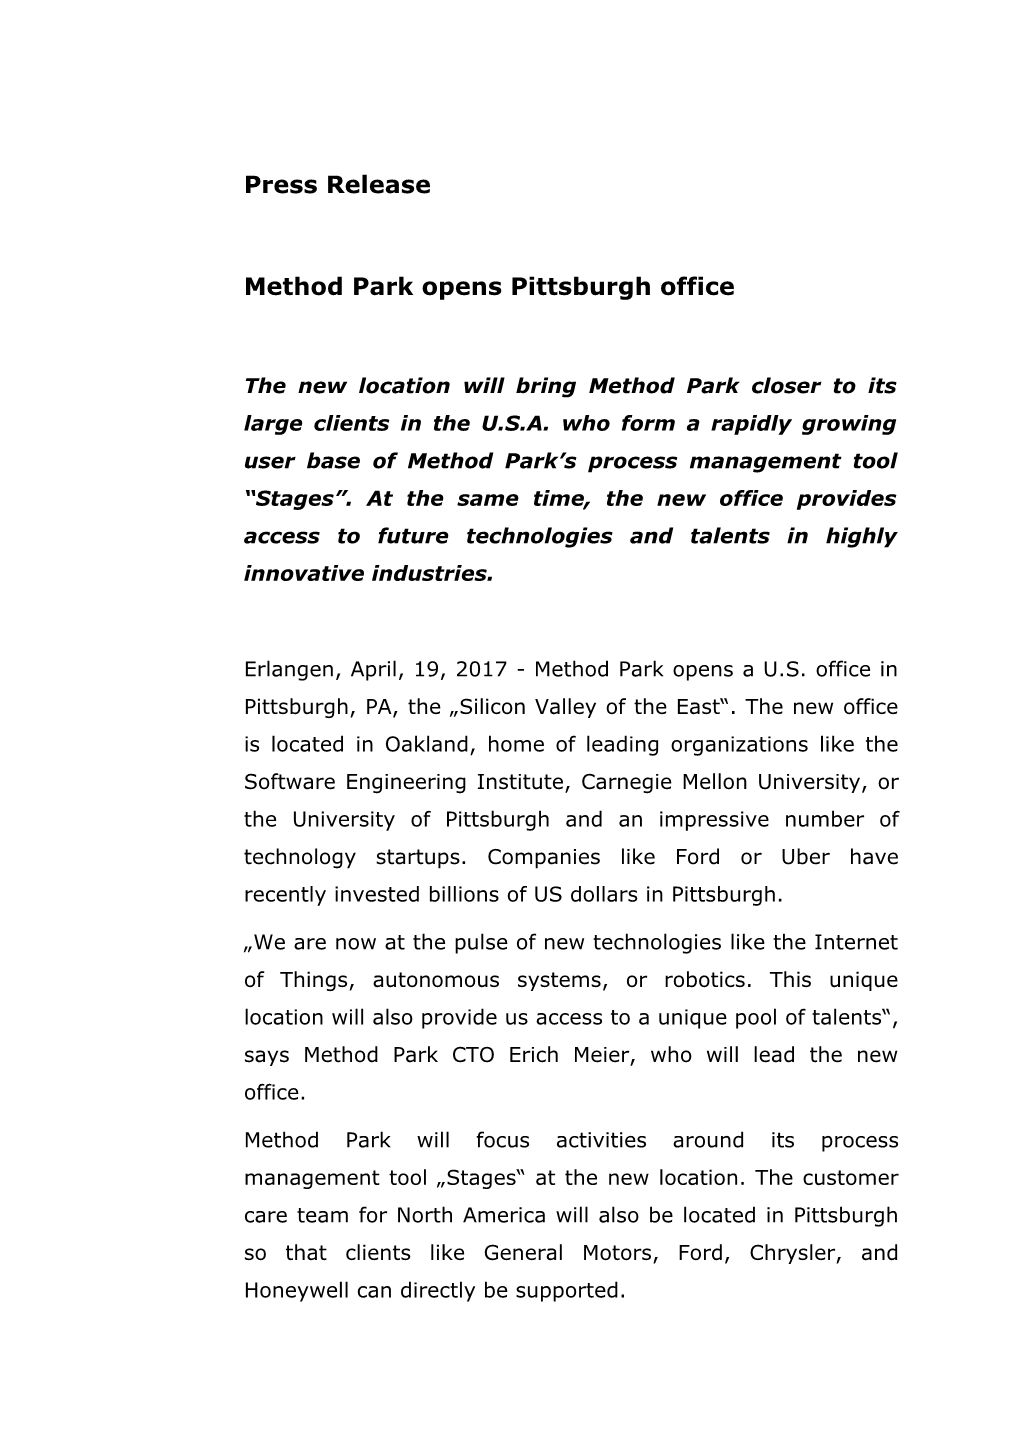 Method Park Opens Pittsburgh Office